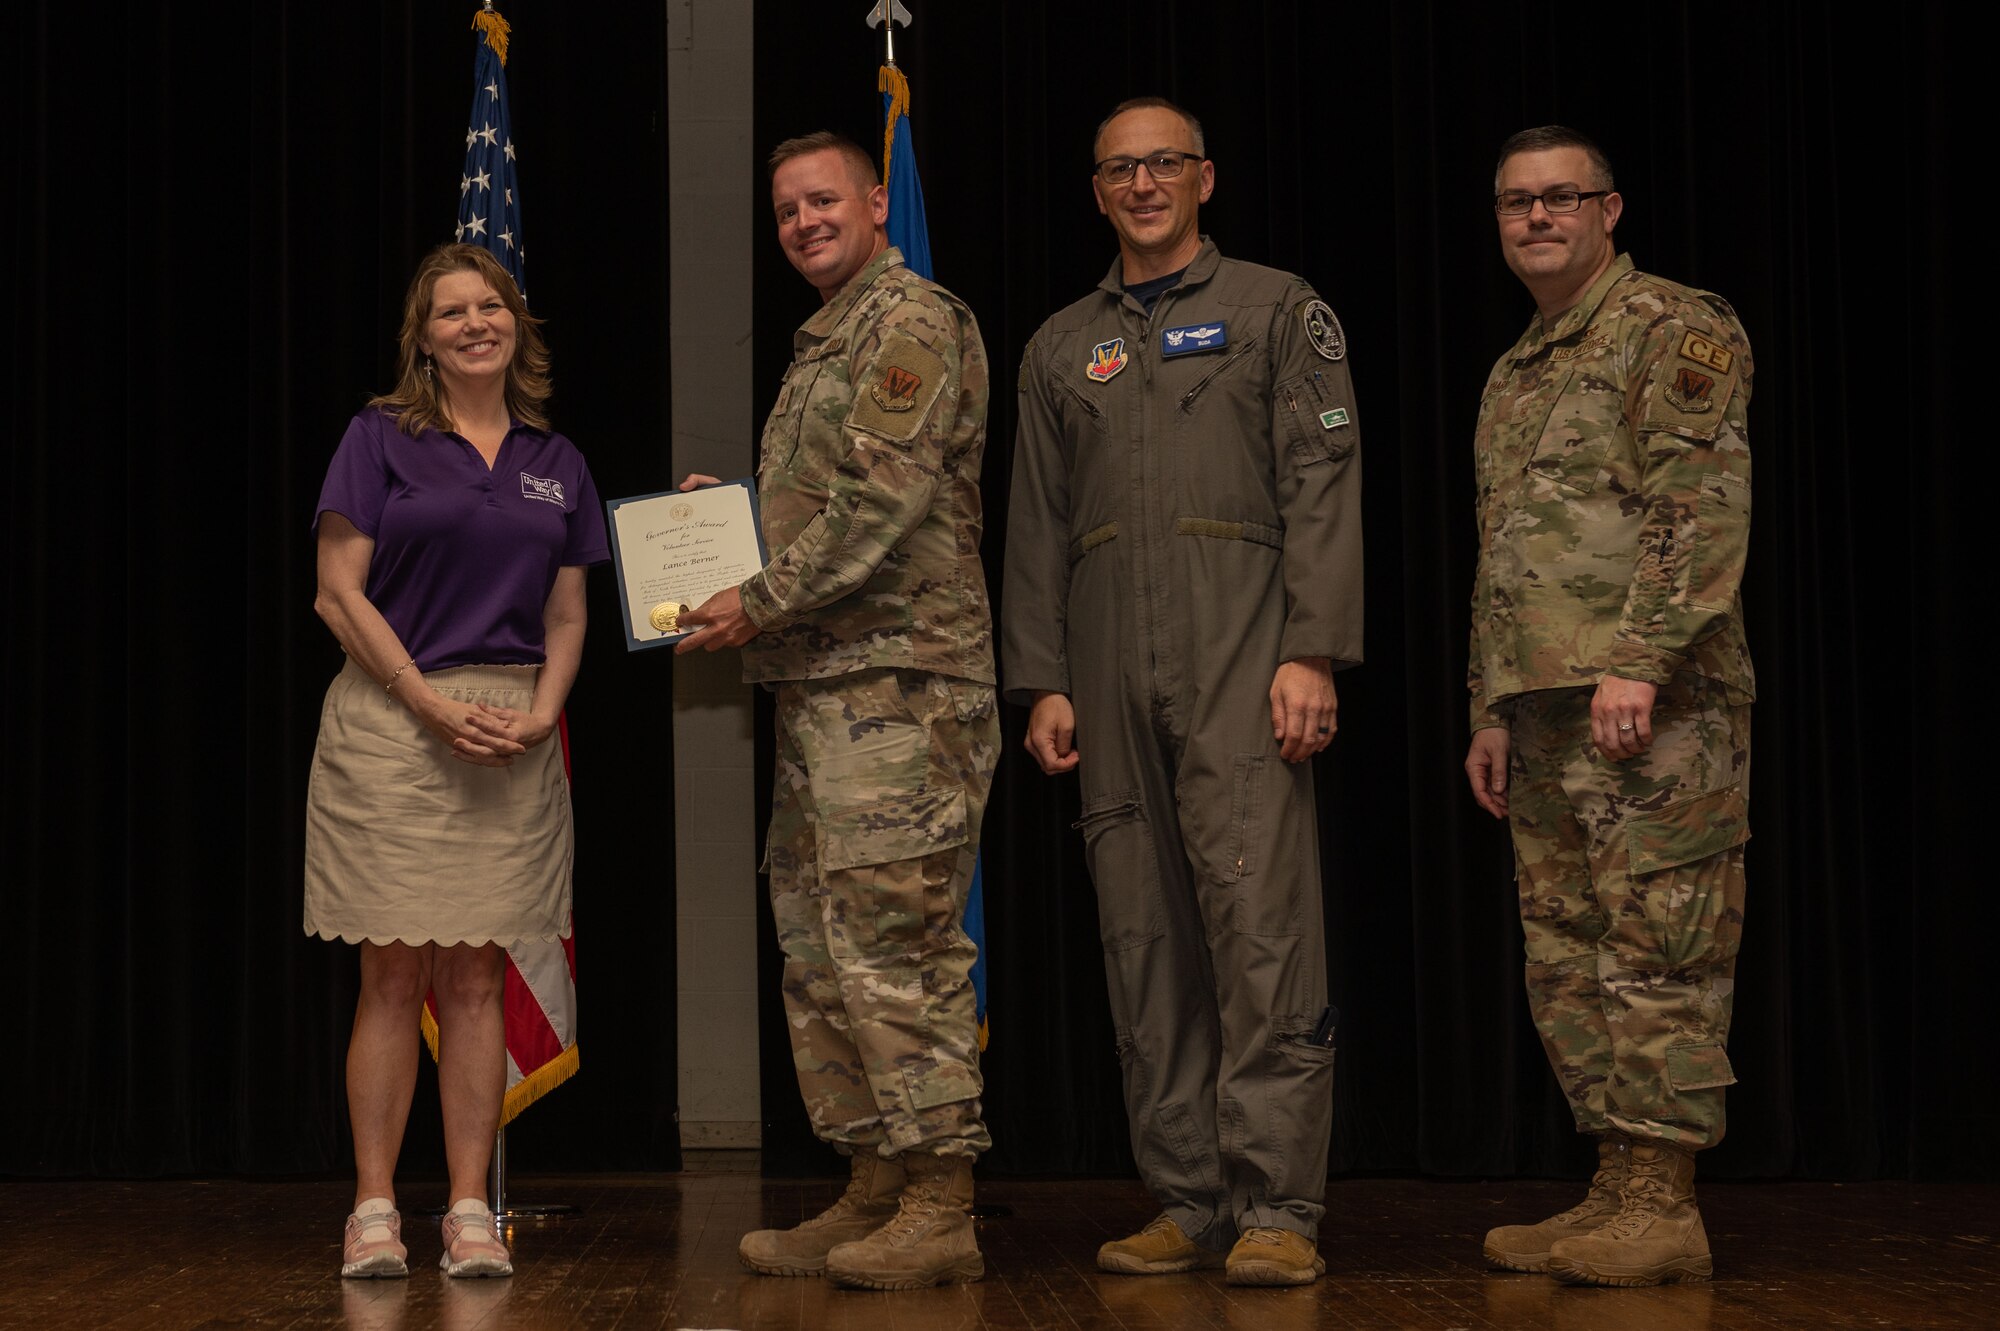 Col. Steven Bofferding, 4th Fighter Wing vice commander, Chief Master Sgt. Kyle O’Hara, right, 4th Civil Engineer Squadron command chief, and Sherry Archibald, left, United Way executive director, present the North Carolina Governor’s Volunteer Service Award to Master Sgt. Lance Berner, 4th Logistics Readiness Squadron non-commissioned officer in charge, during a volunteer appreciation ceremony at Seymour Johnson Air Force Base, North Carolina, April 21, 2023. This award honors the true spirit of volunteerism by recognizing individuals, groups and businesses that make a significant contribution to their community through volunteer service. (U.S. Air Force photo by Airman 1st Class Rebecca Sirimarco-Lang)